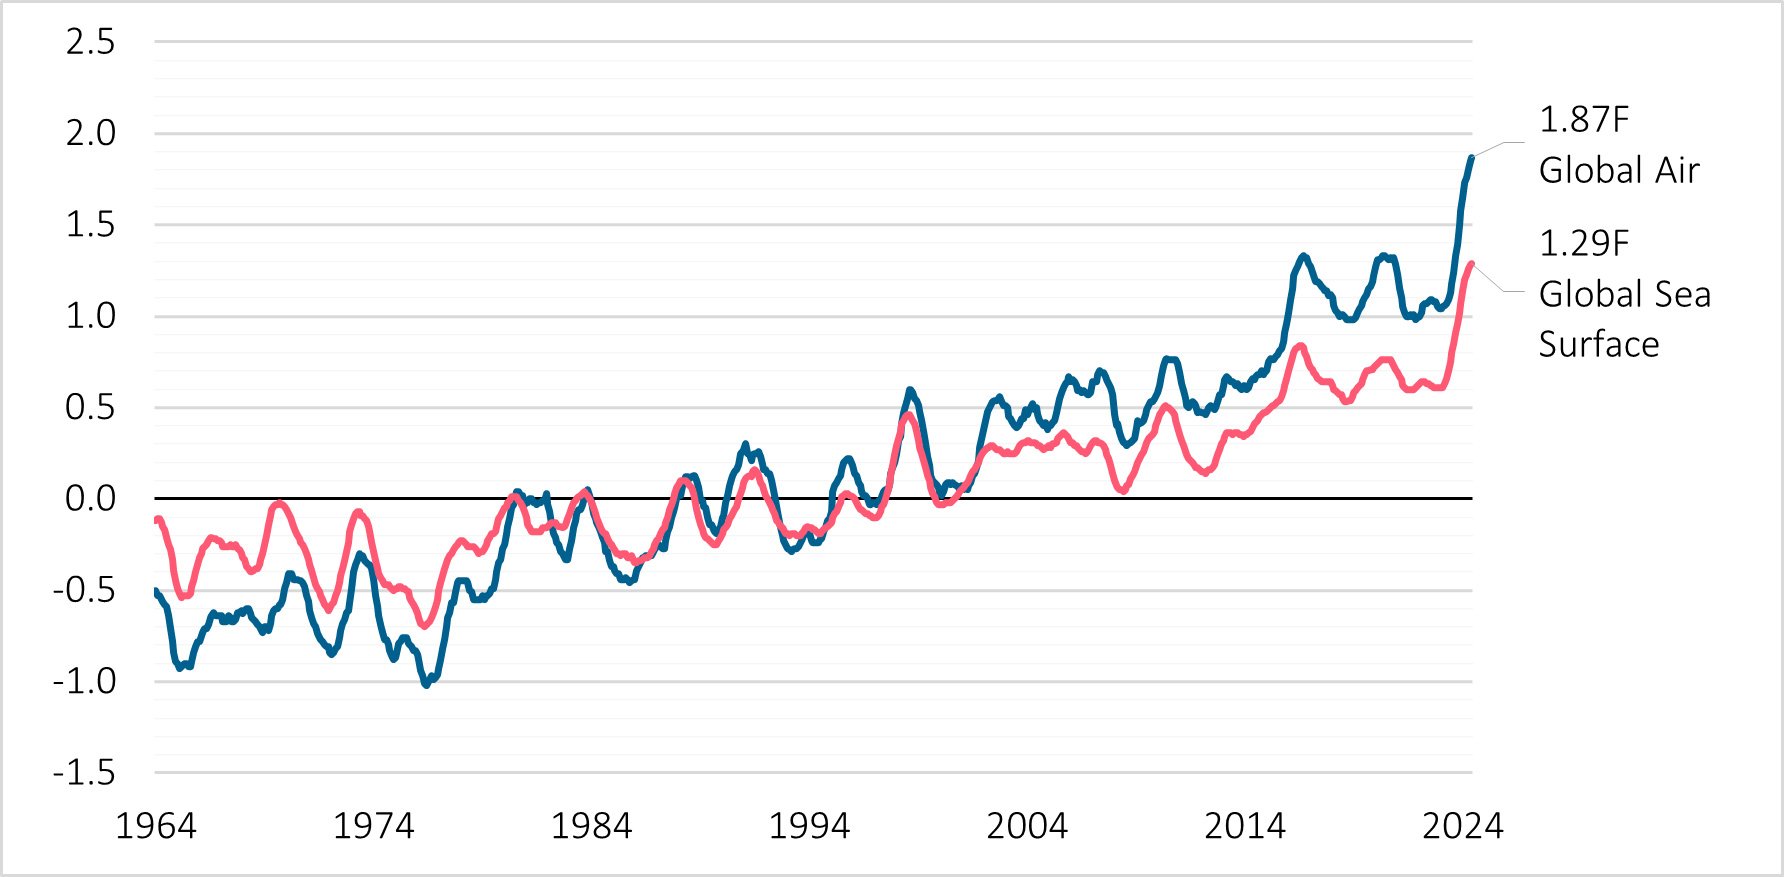 This graph shows a time series of global air temperature and global sea surface temperatures, expressed relative to the 1960-to-2019 average temperature